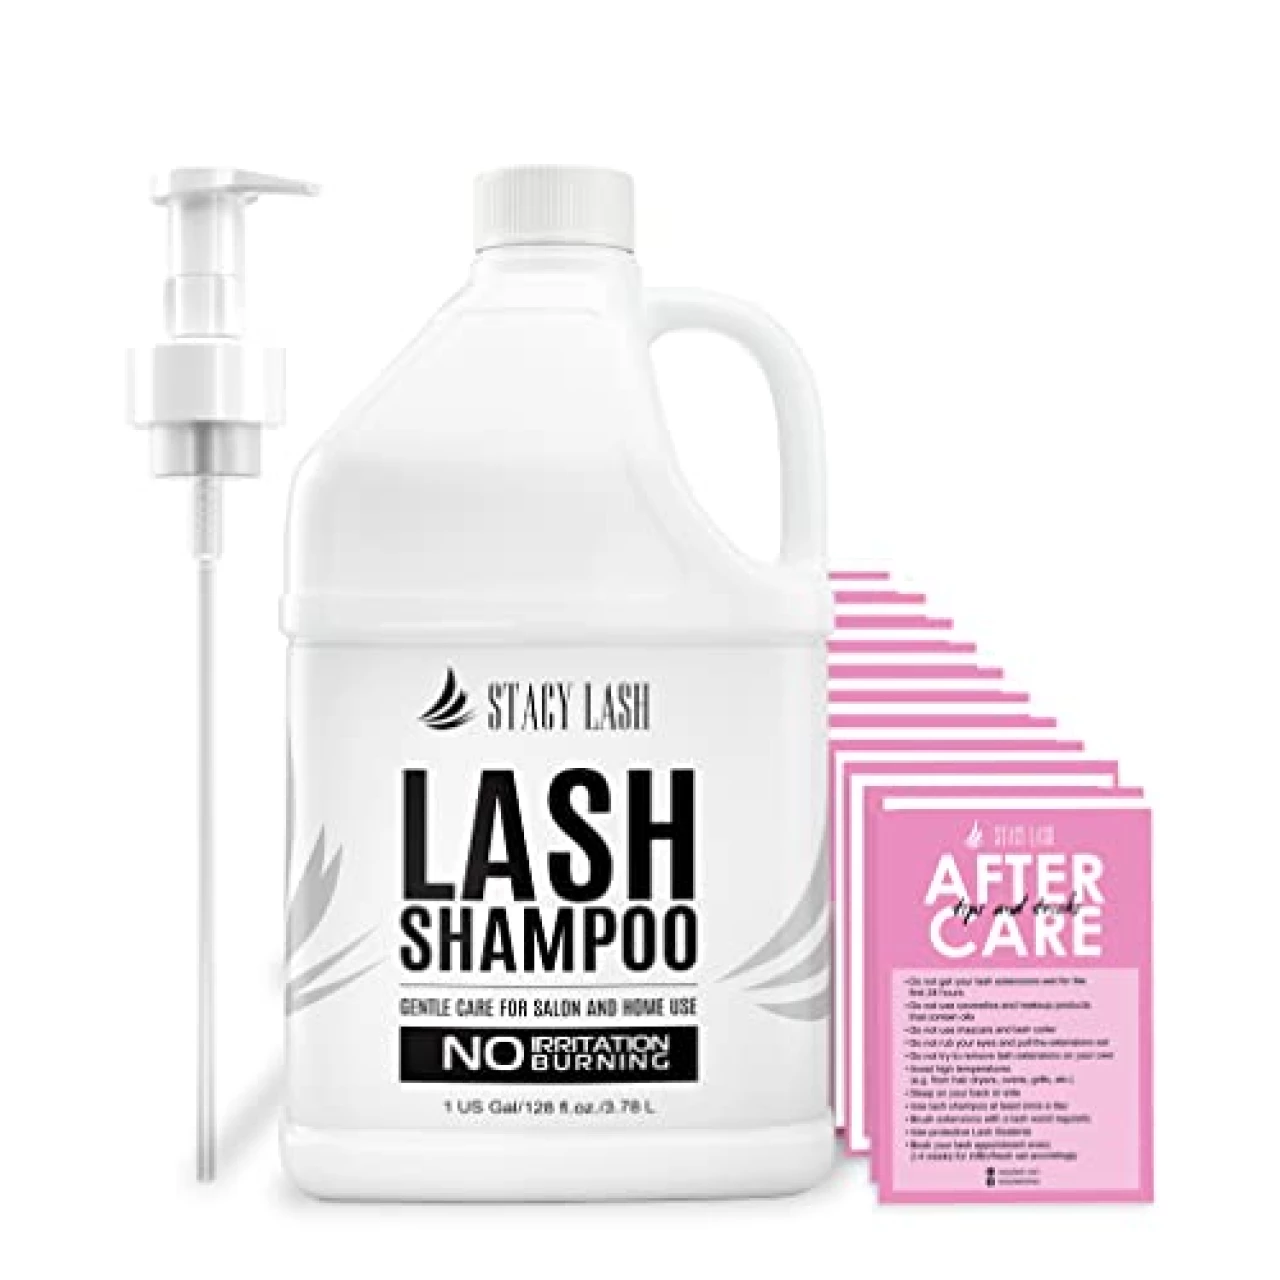 STACY LASH Eyelash Extension Shampoo 1US Gal / 128 fl.oz. / 3.78L / Eyelid Foaming Cleanser/Safe Wash for Extensions &amp; Natural Lashes/Supplies for Professional &amp; Home Use / 50 Aftercare Cards